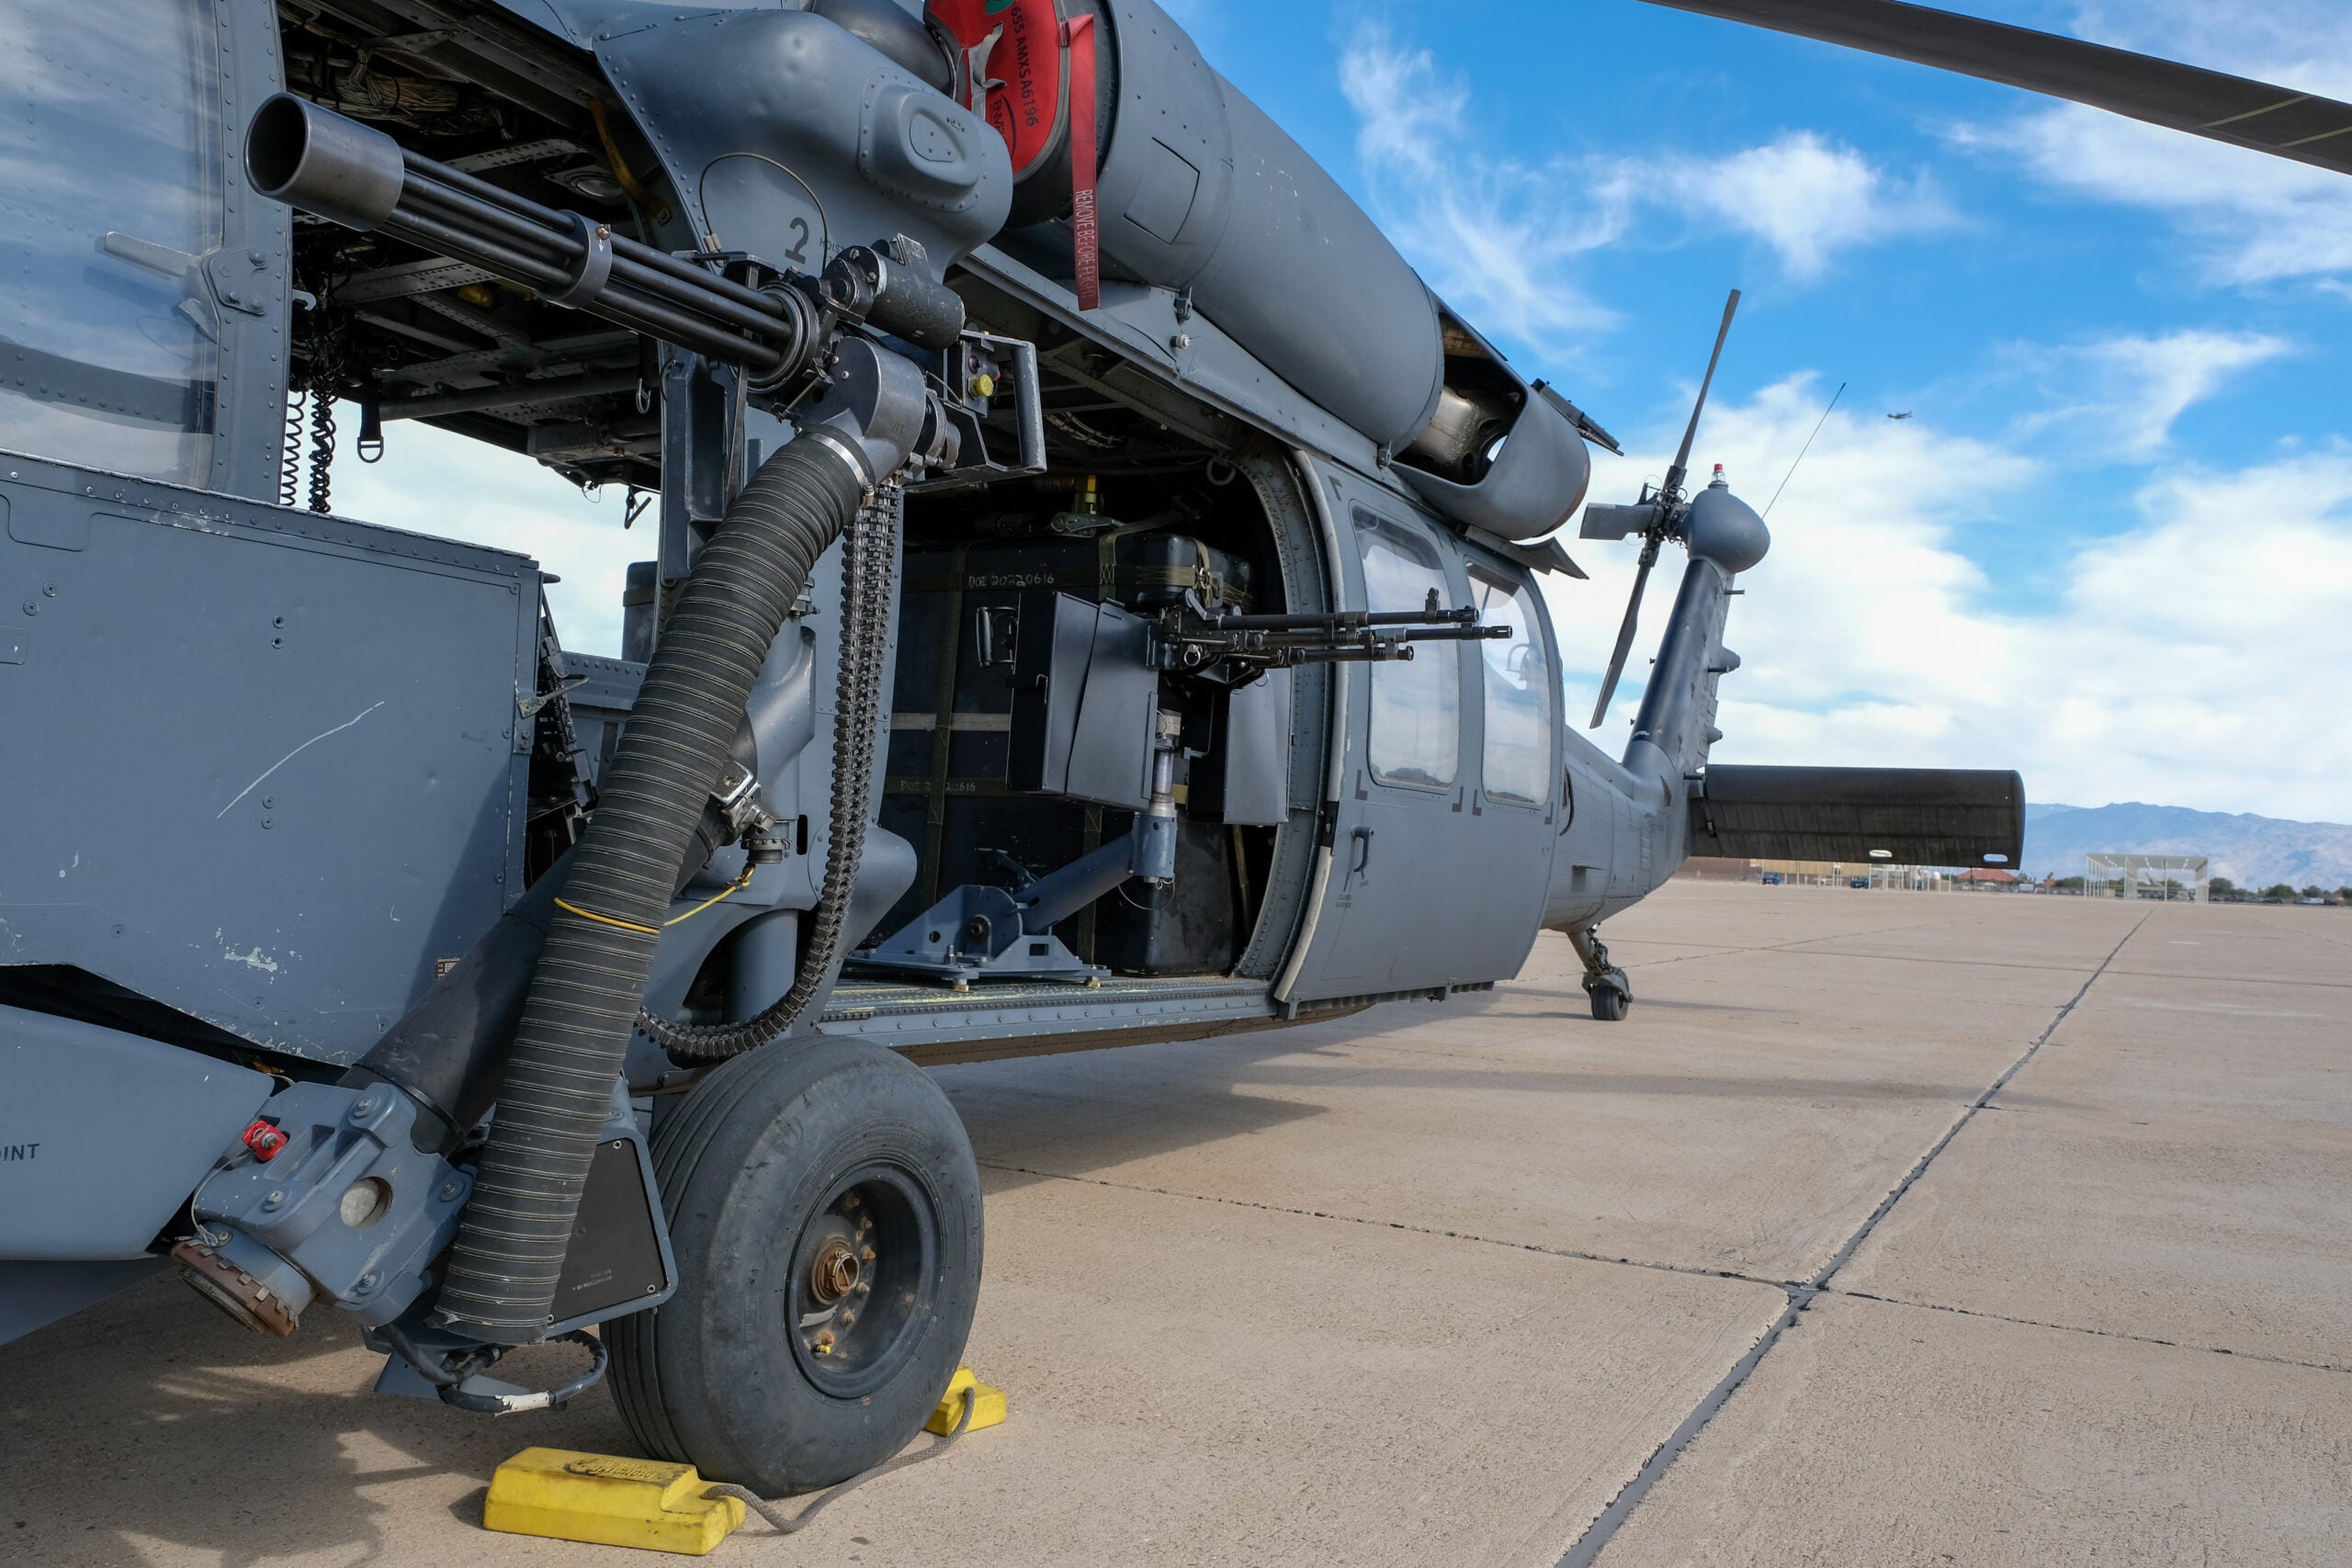 Two M240s are mounted inside an HH-60G Pave Hawk helicopter Nov. 22, 2022, at Davis-Monthan Air Force Base, Arizona. The 943d RQG designed a concept to mount four additional M240 machine guns into HH-60G helicopters to provide more firepower to the 920th Rescue Wing’s personnel recovery task force in contested environments. (U.S. Air Force photo by Andre Trinidad)